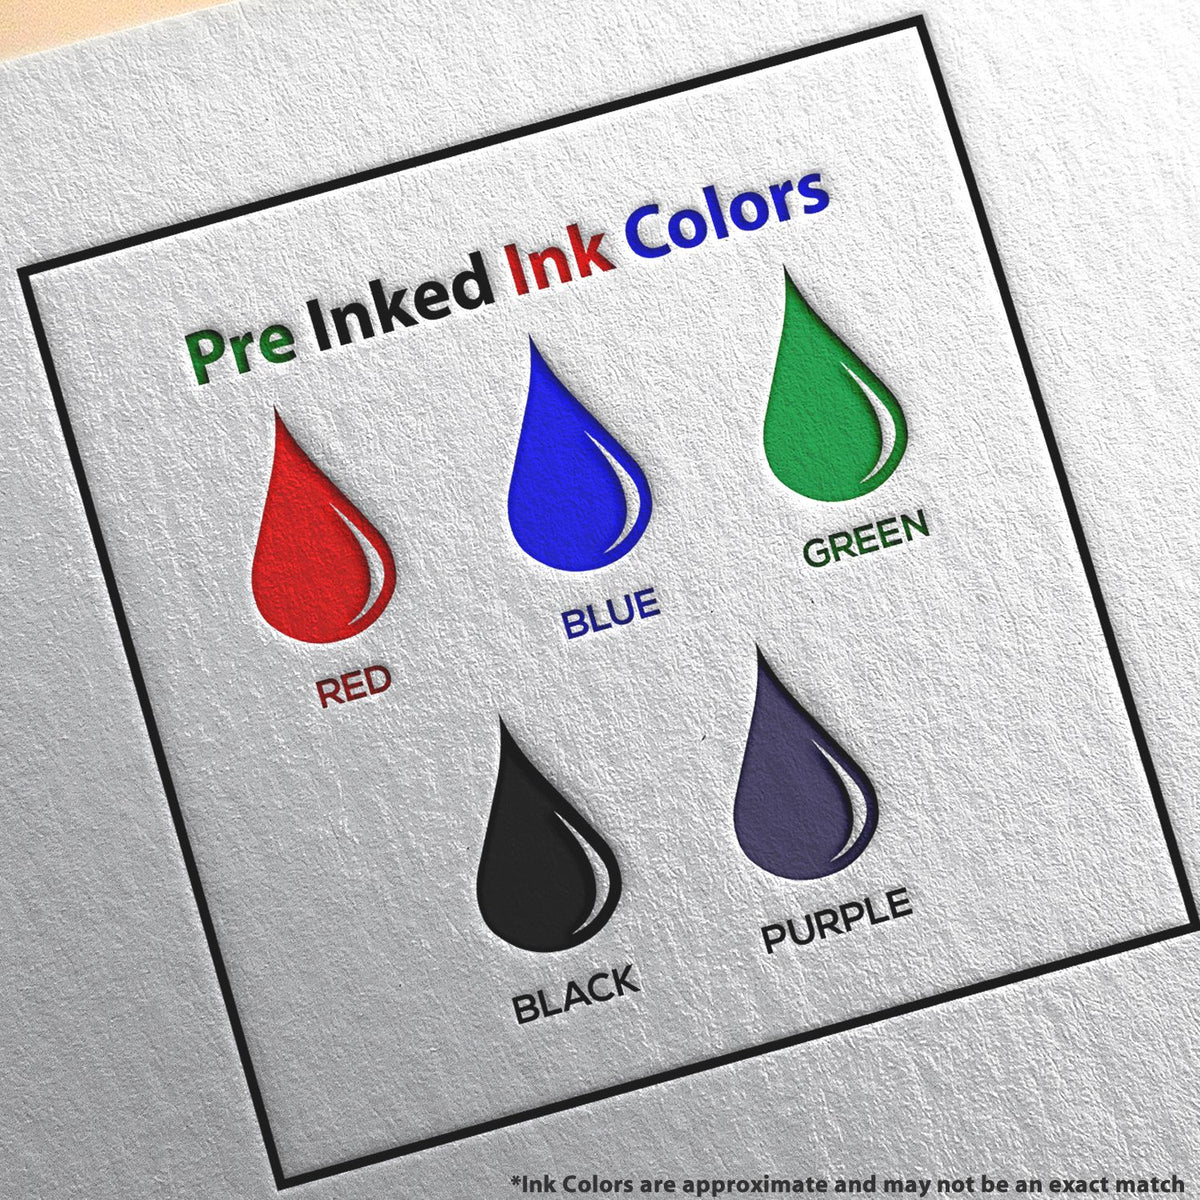 A picture showing the different ink colors or hues available for the Premium MaxLight Pre-Inked Alaska Landscape Architectural Stamp product.